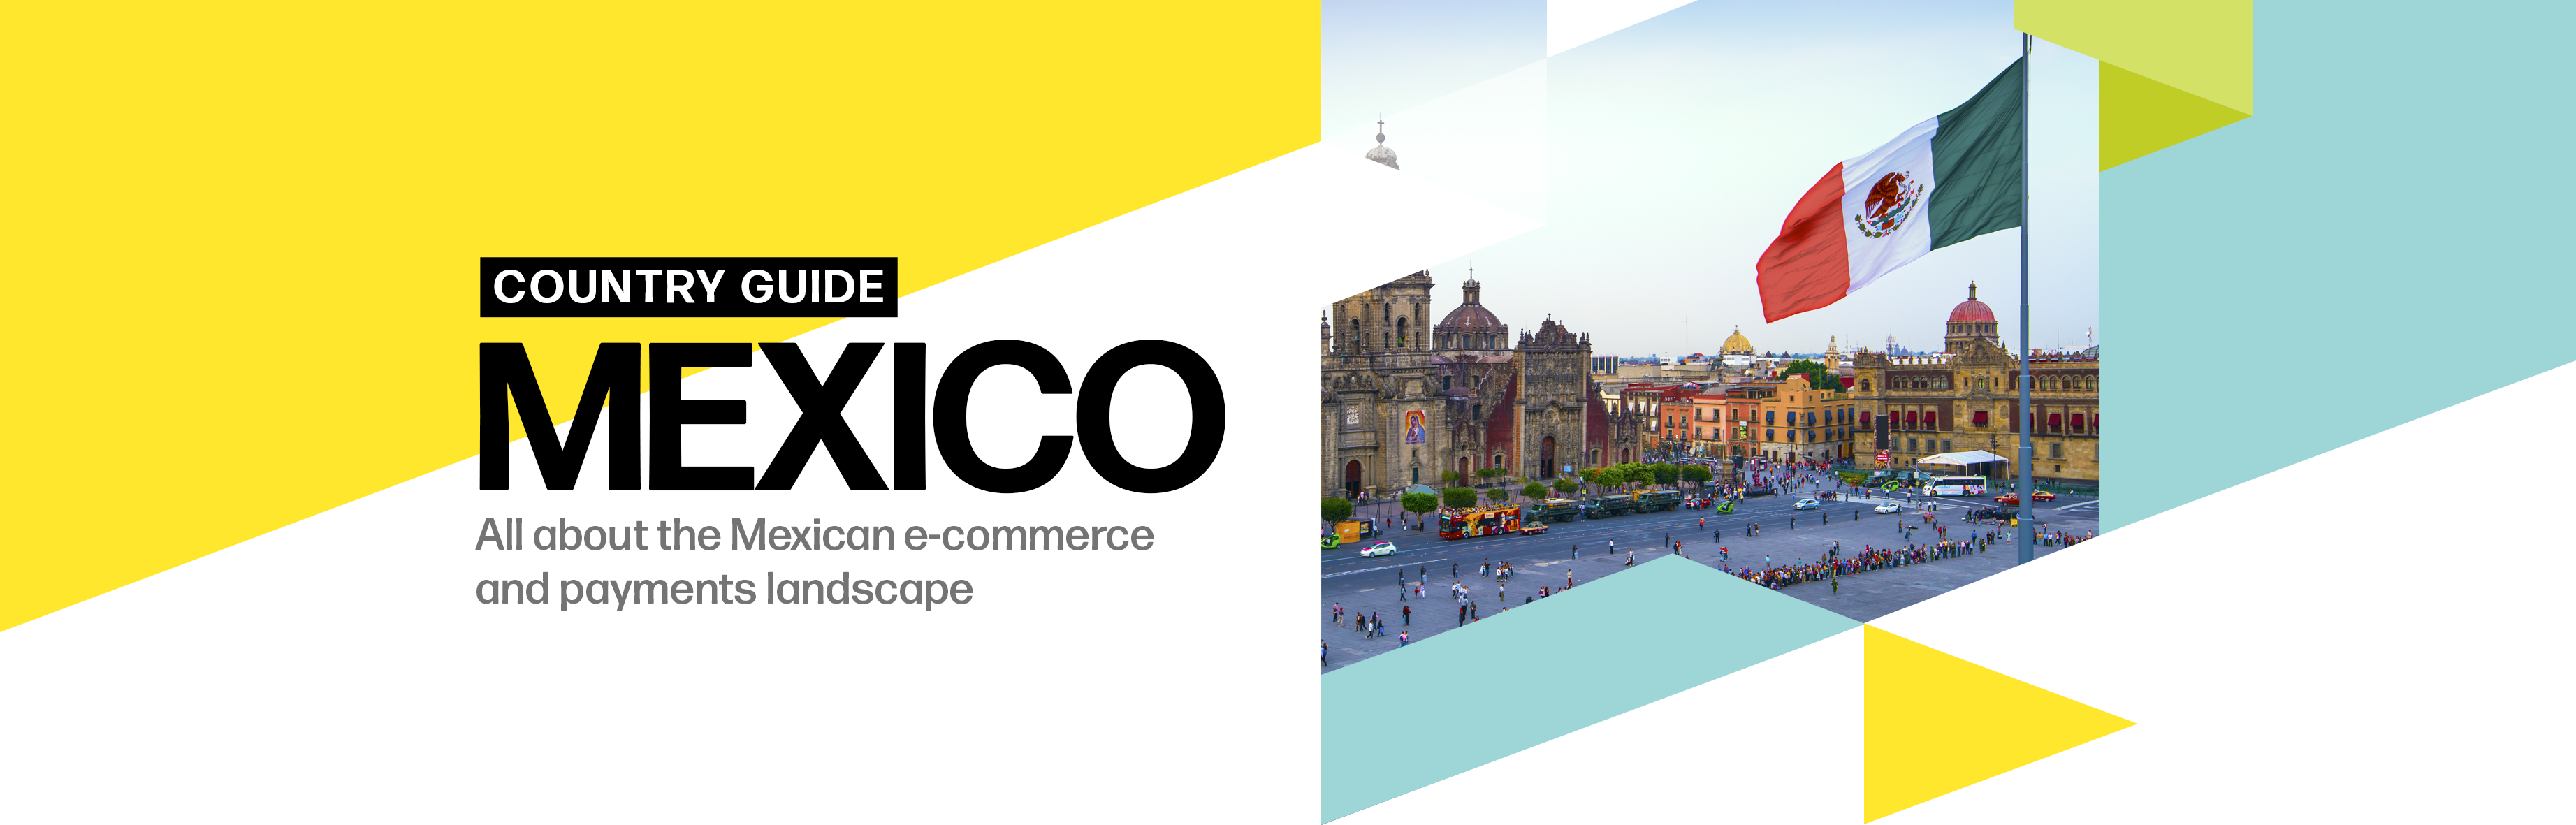 Country Guide Mexico: All about the Mexican e-commerce and payments landscape